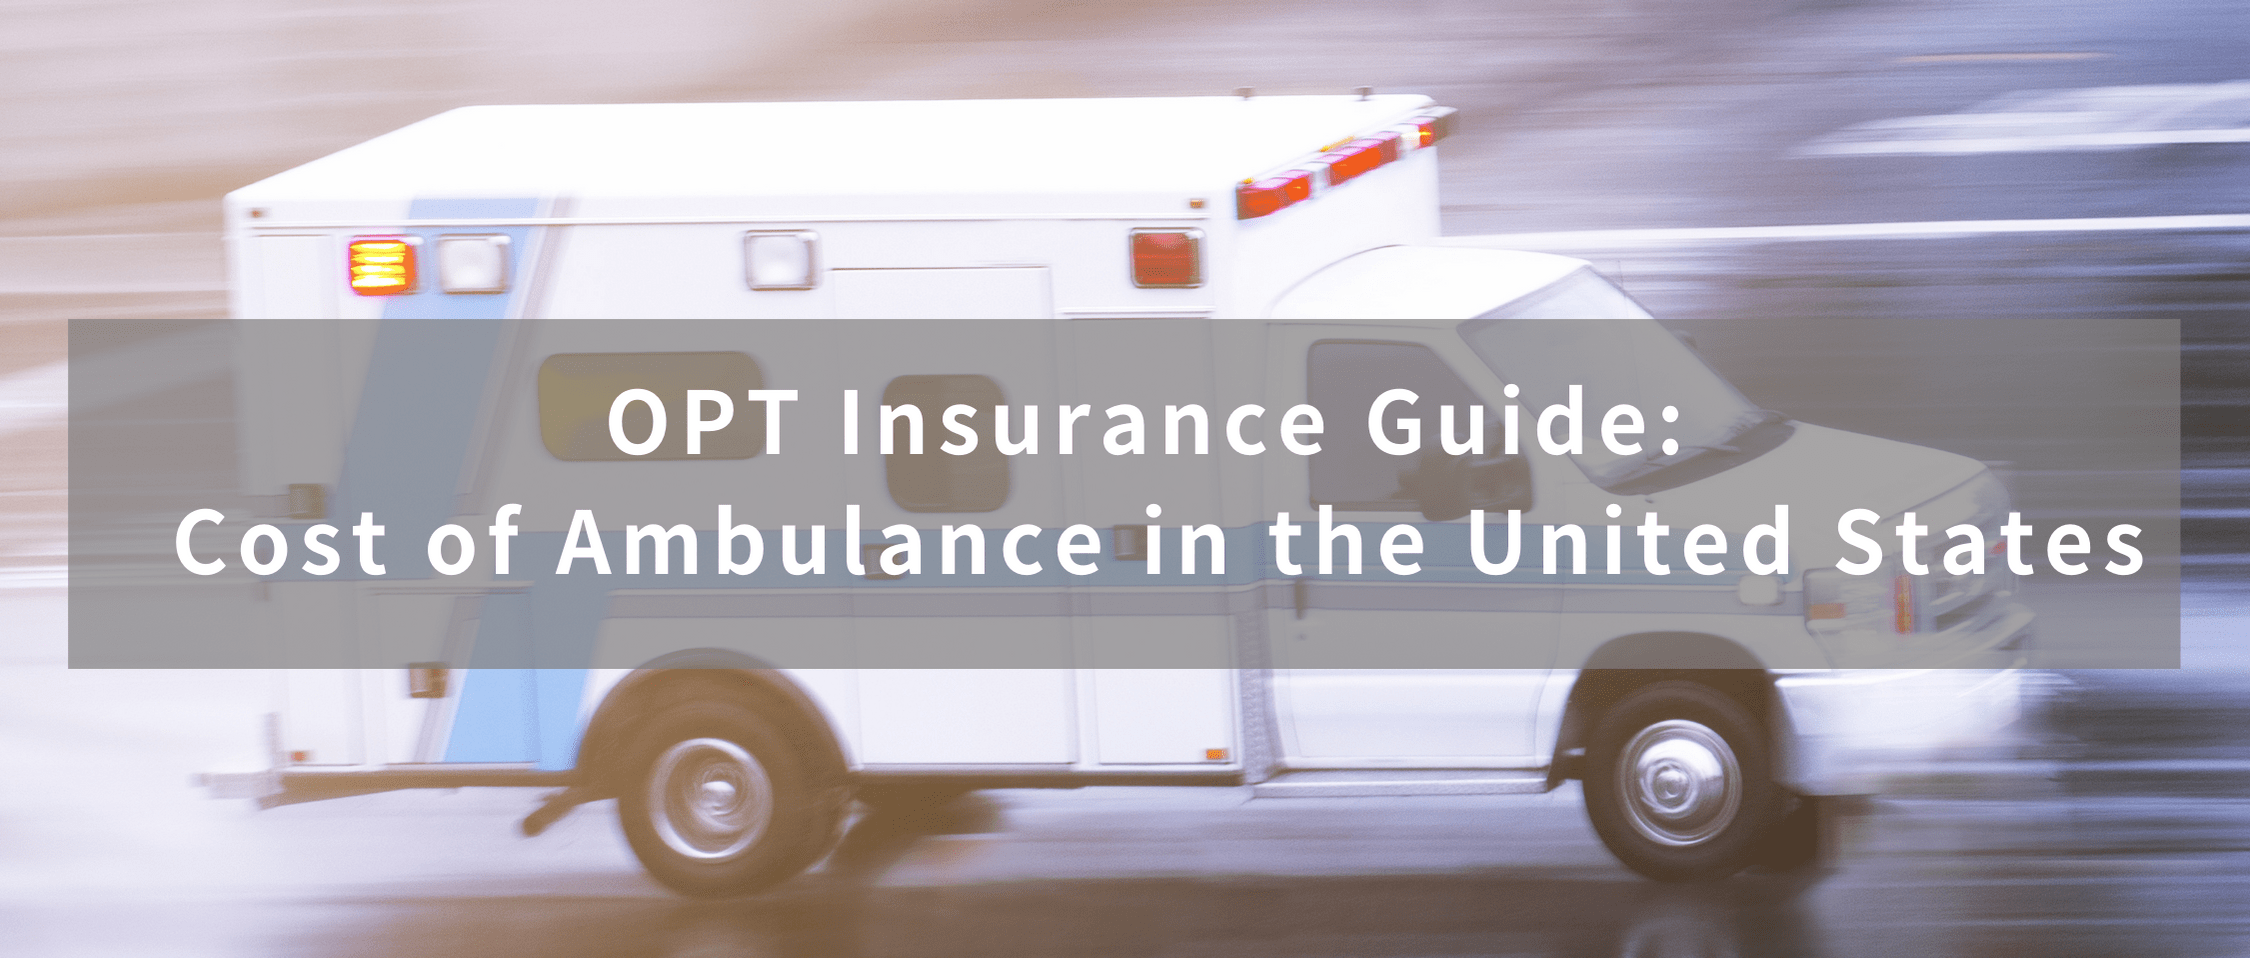 OPT insurance guide : Cost of ambulance in the United States